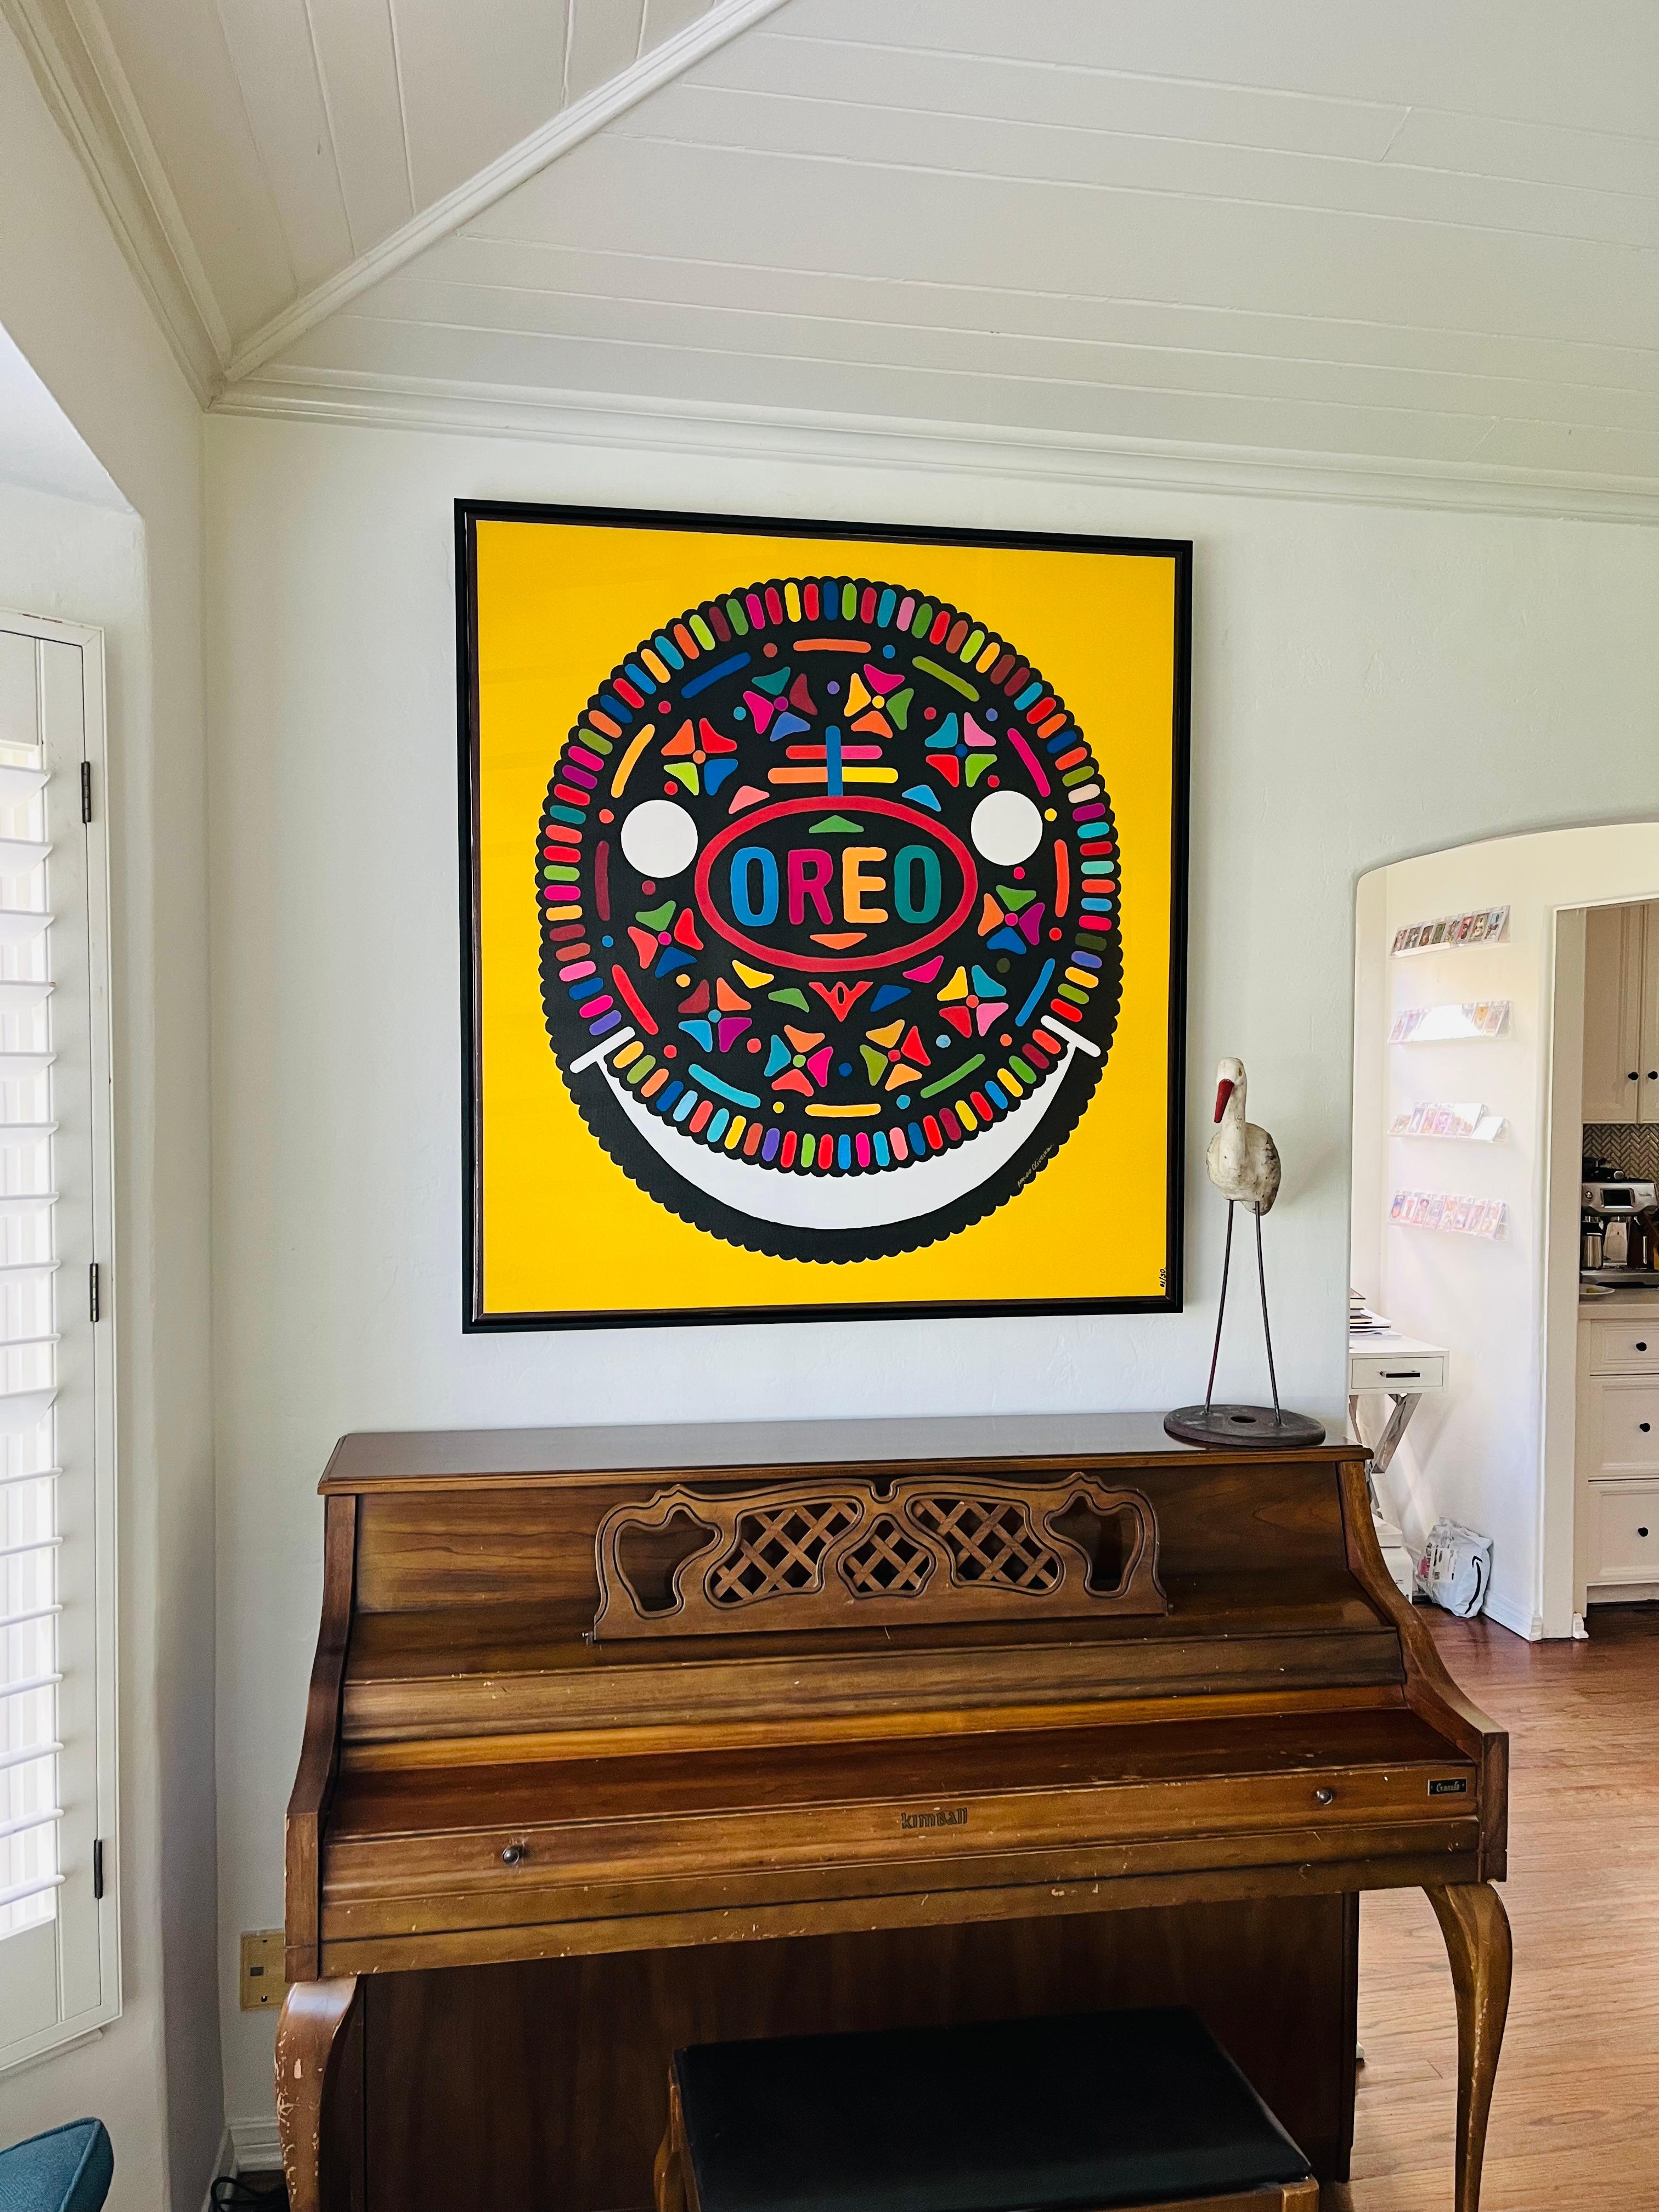               **ANNUAL SUPER SALE UNTIL jUNE 15TH ONLY**
**This Price Won't Be Repeated Again This Year - Take Advantage**

Introducing the FRAMED and ready for the wall OREO HAPPY HOUR limited edition at 42